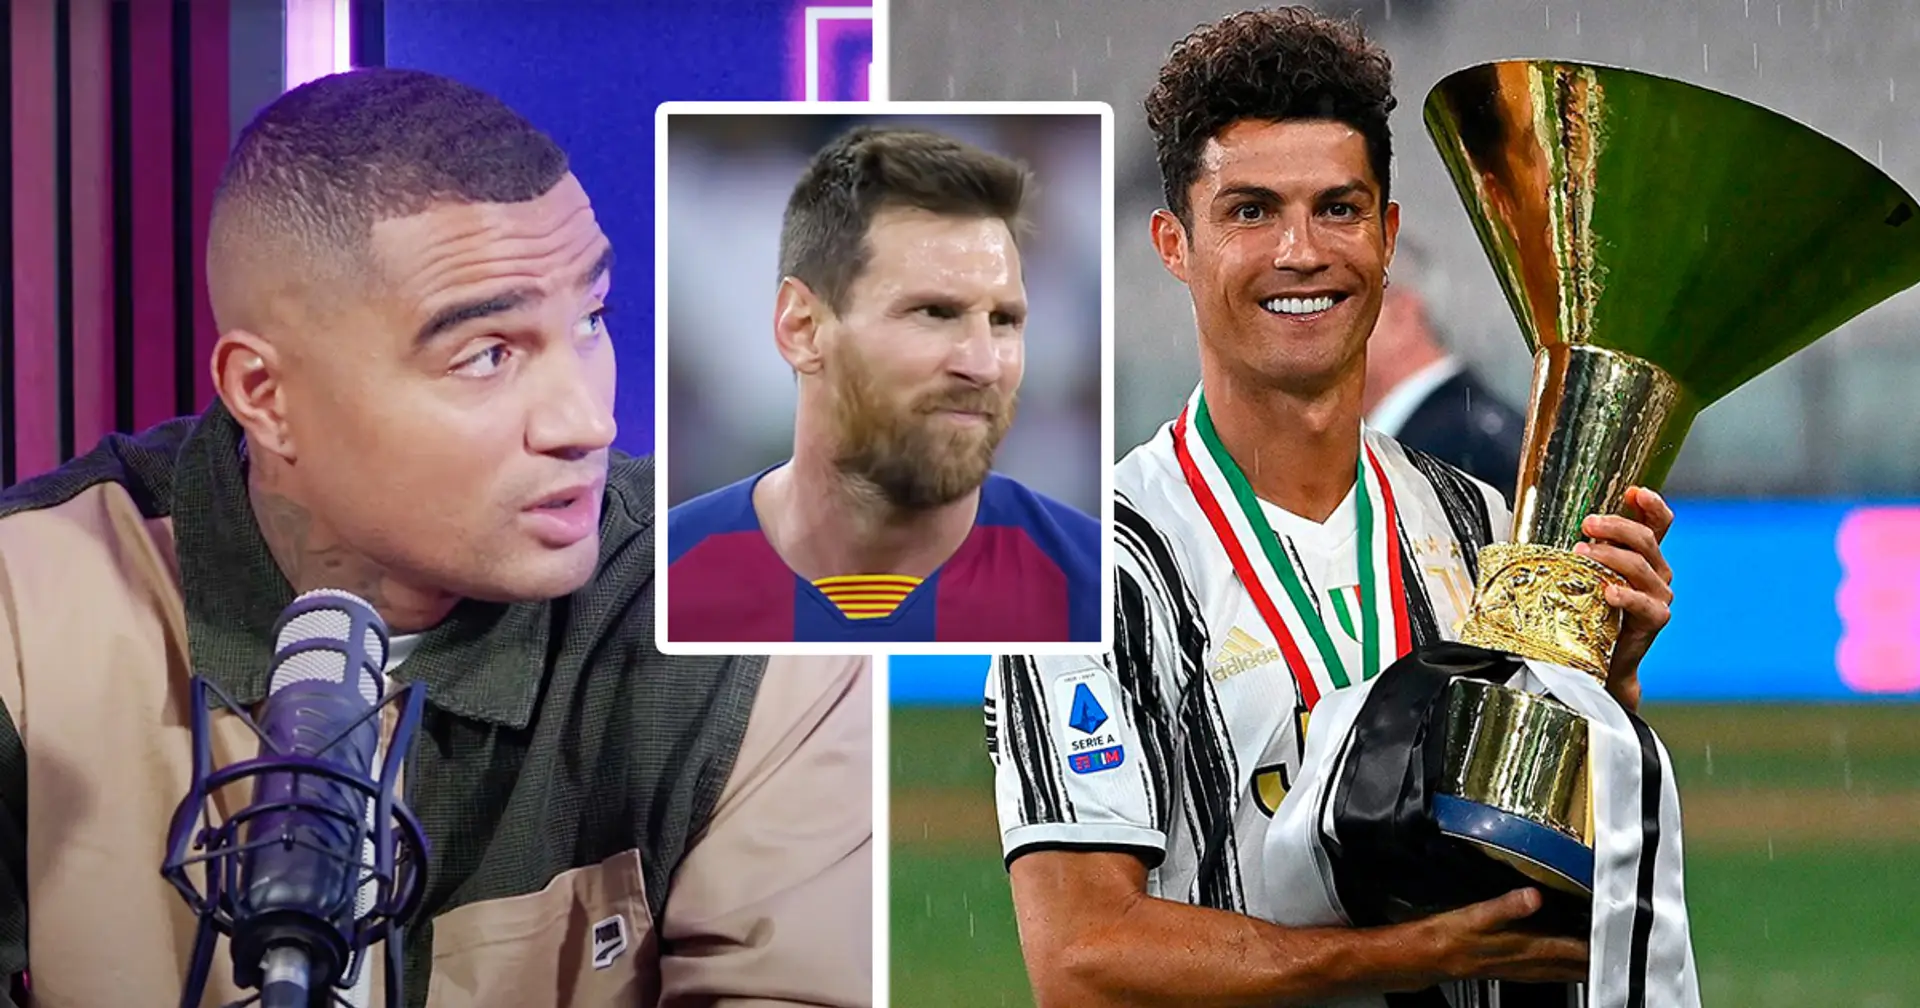 'We spoke one time in the shower': Boateng reveals what Messi asked him after Ronaldo's move to Juventus